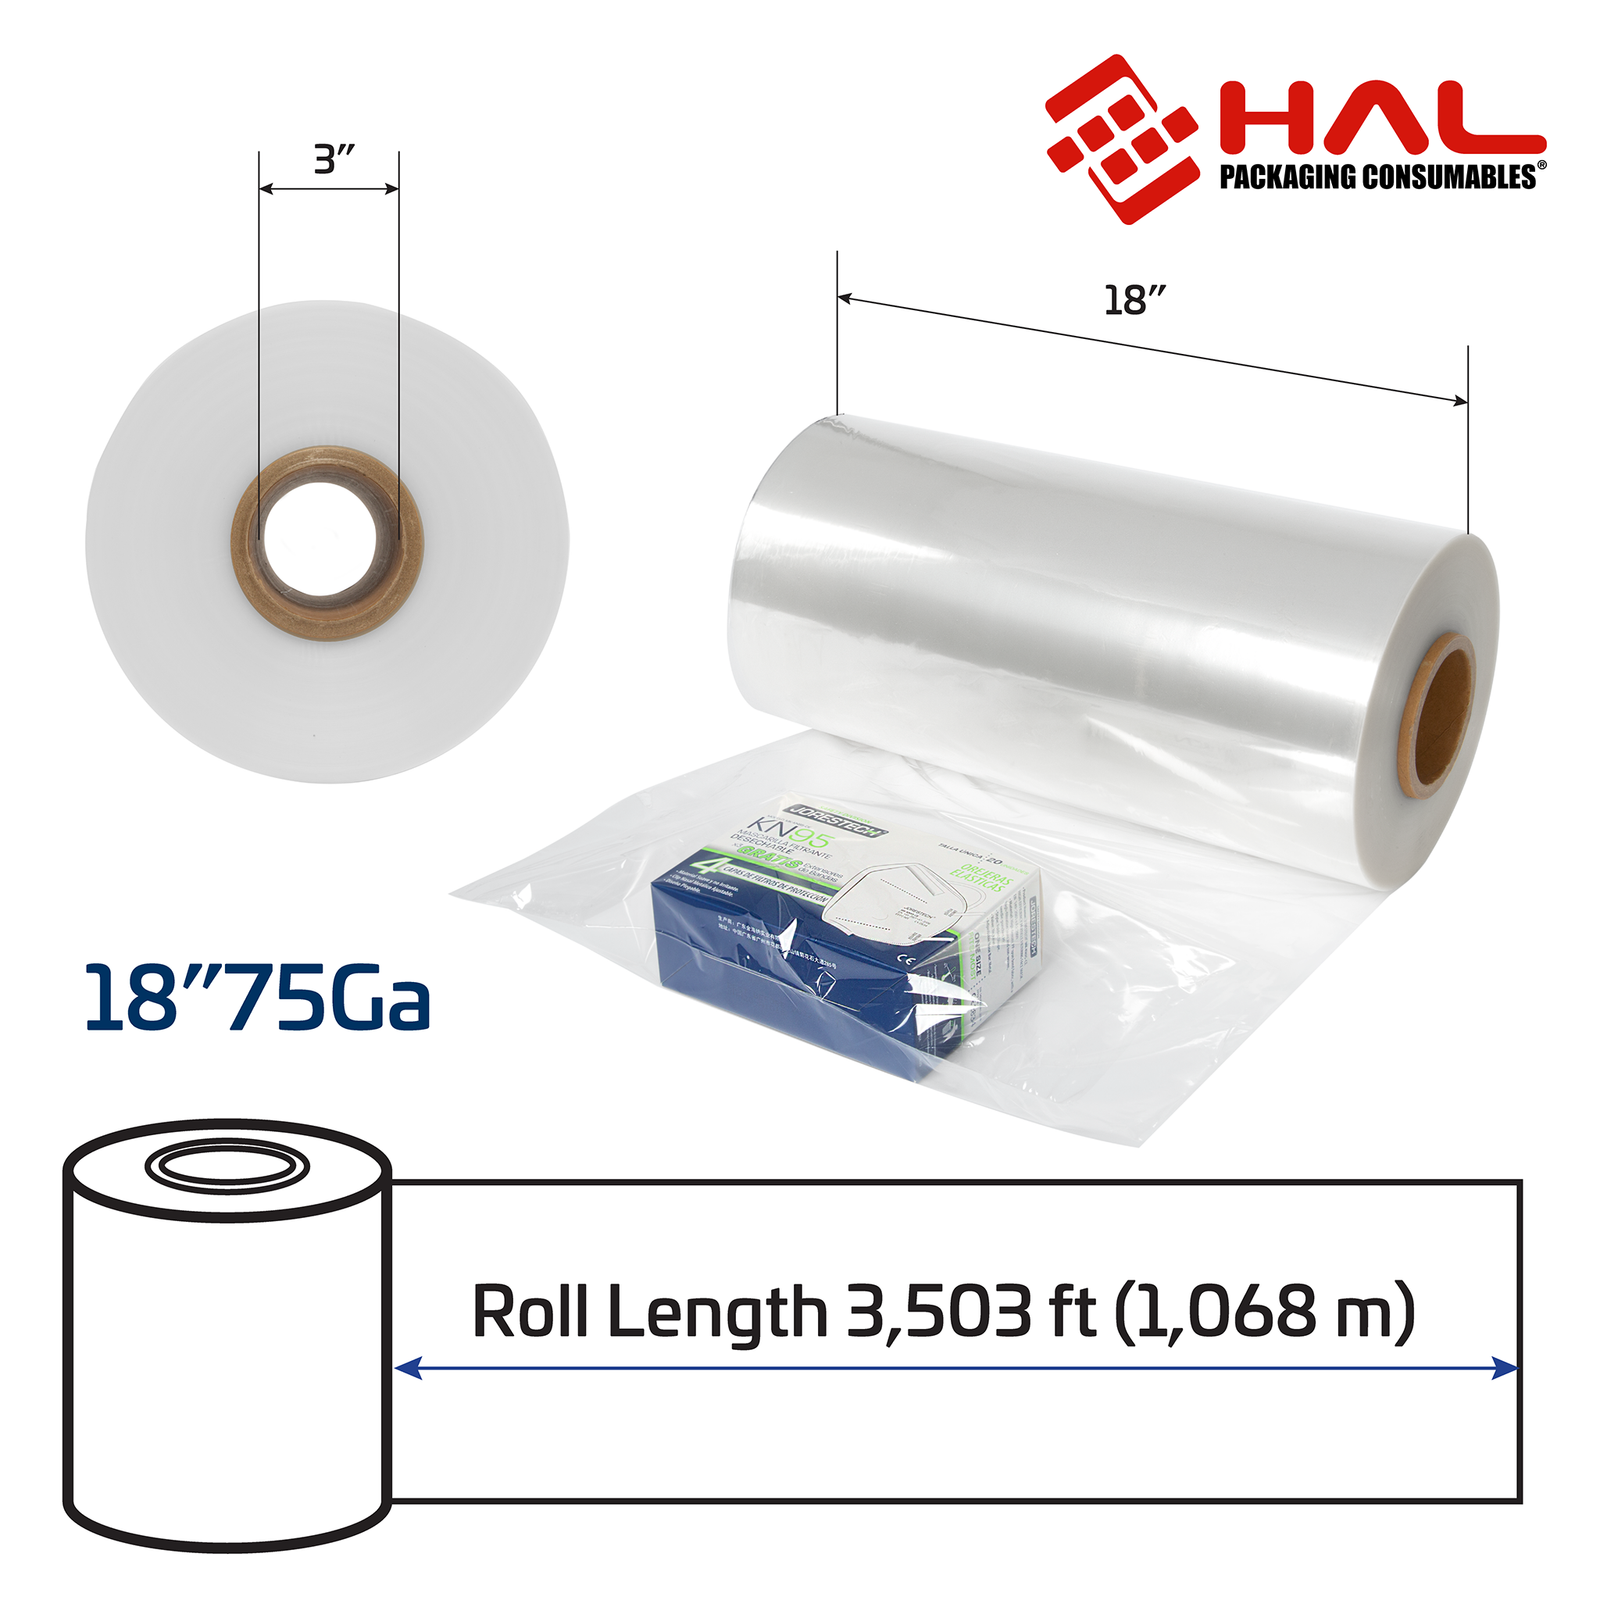 Measurements of the 75 gauge shrink wrapping film tube. 3 inch diameter of the inner core, and 18 inch width with a 3,503 ft. length (1,068 meters).